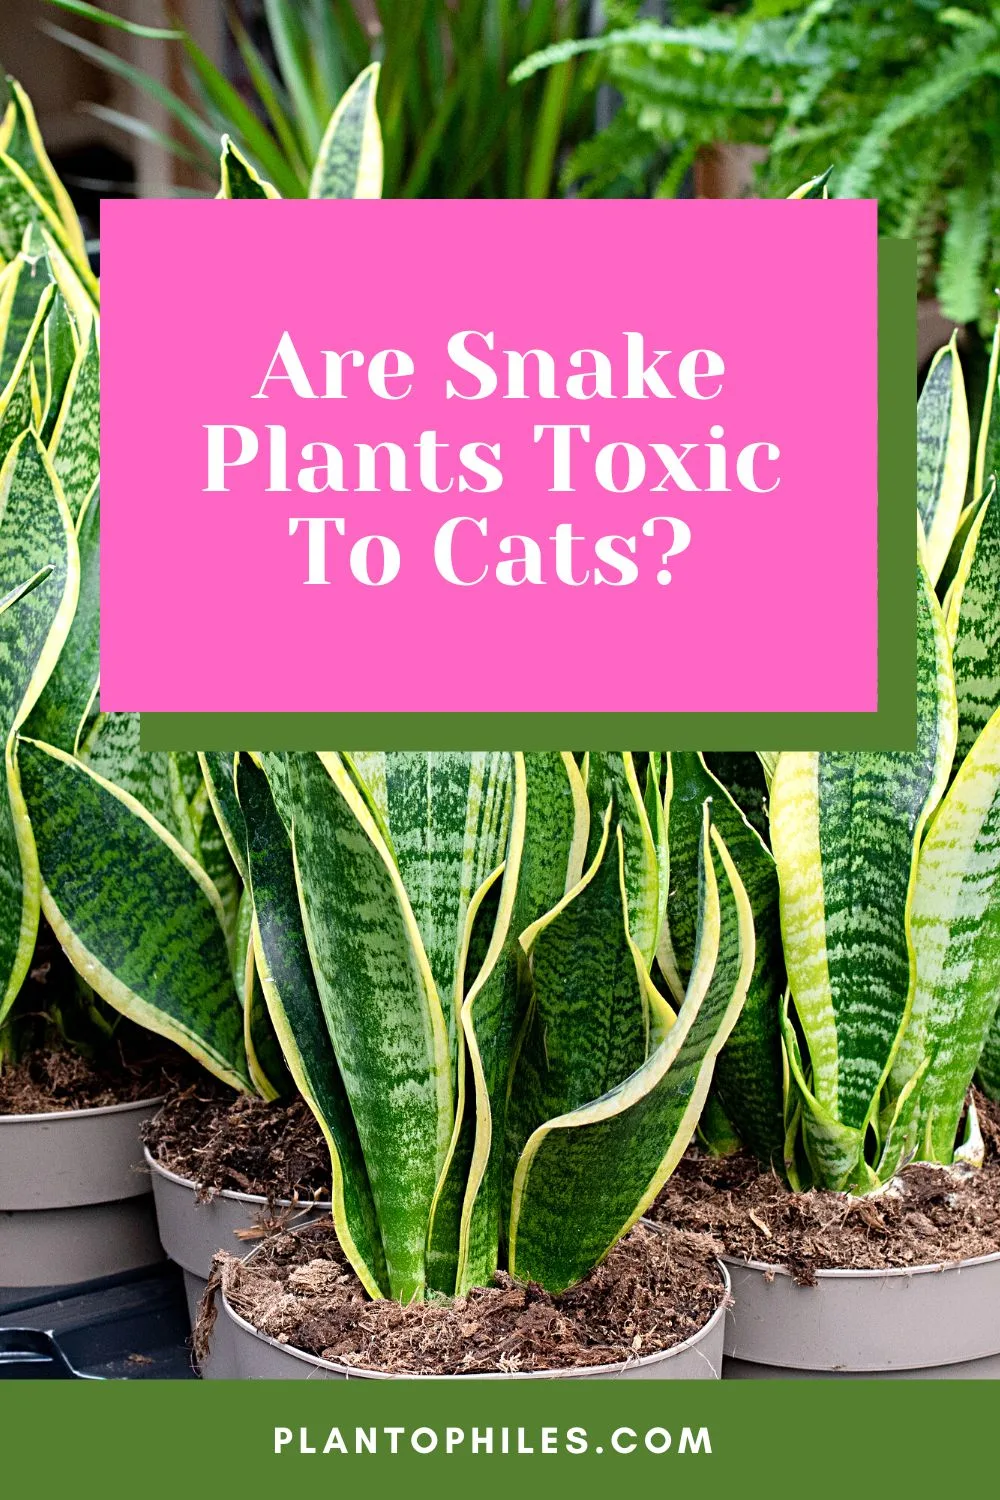 Are Snake Plants Toxic To Cats?